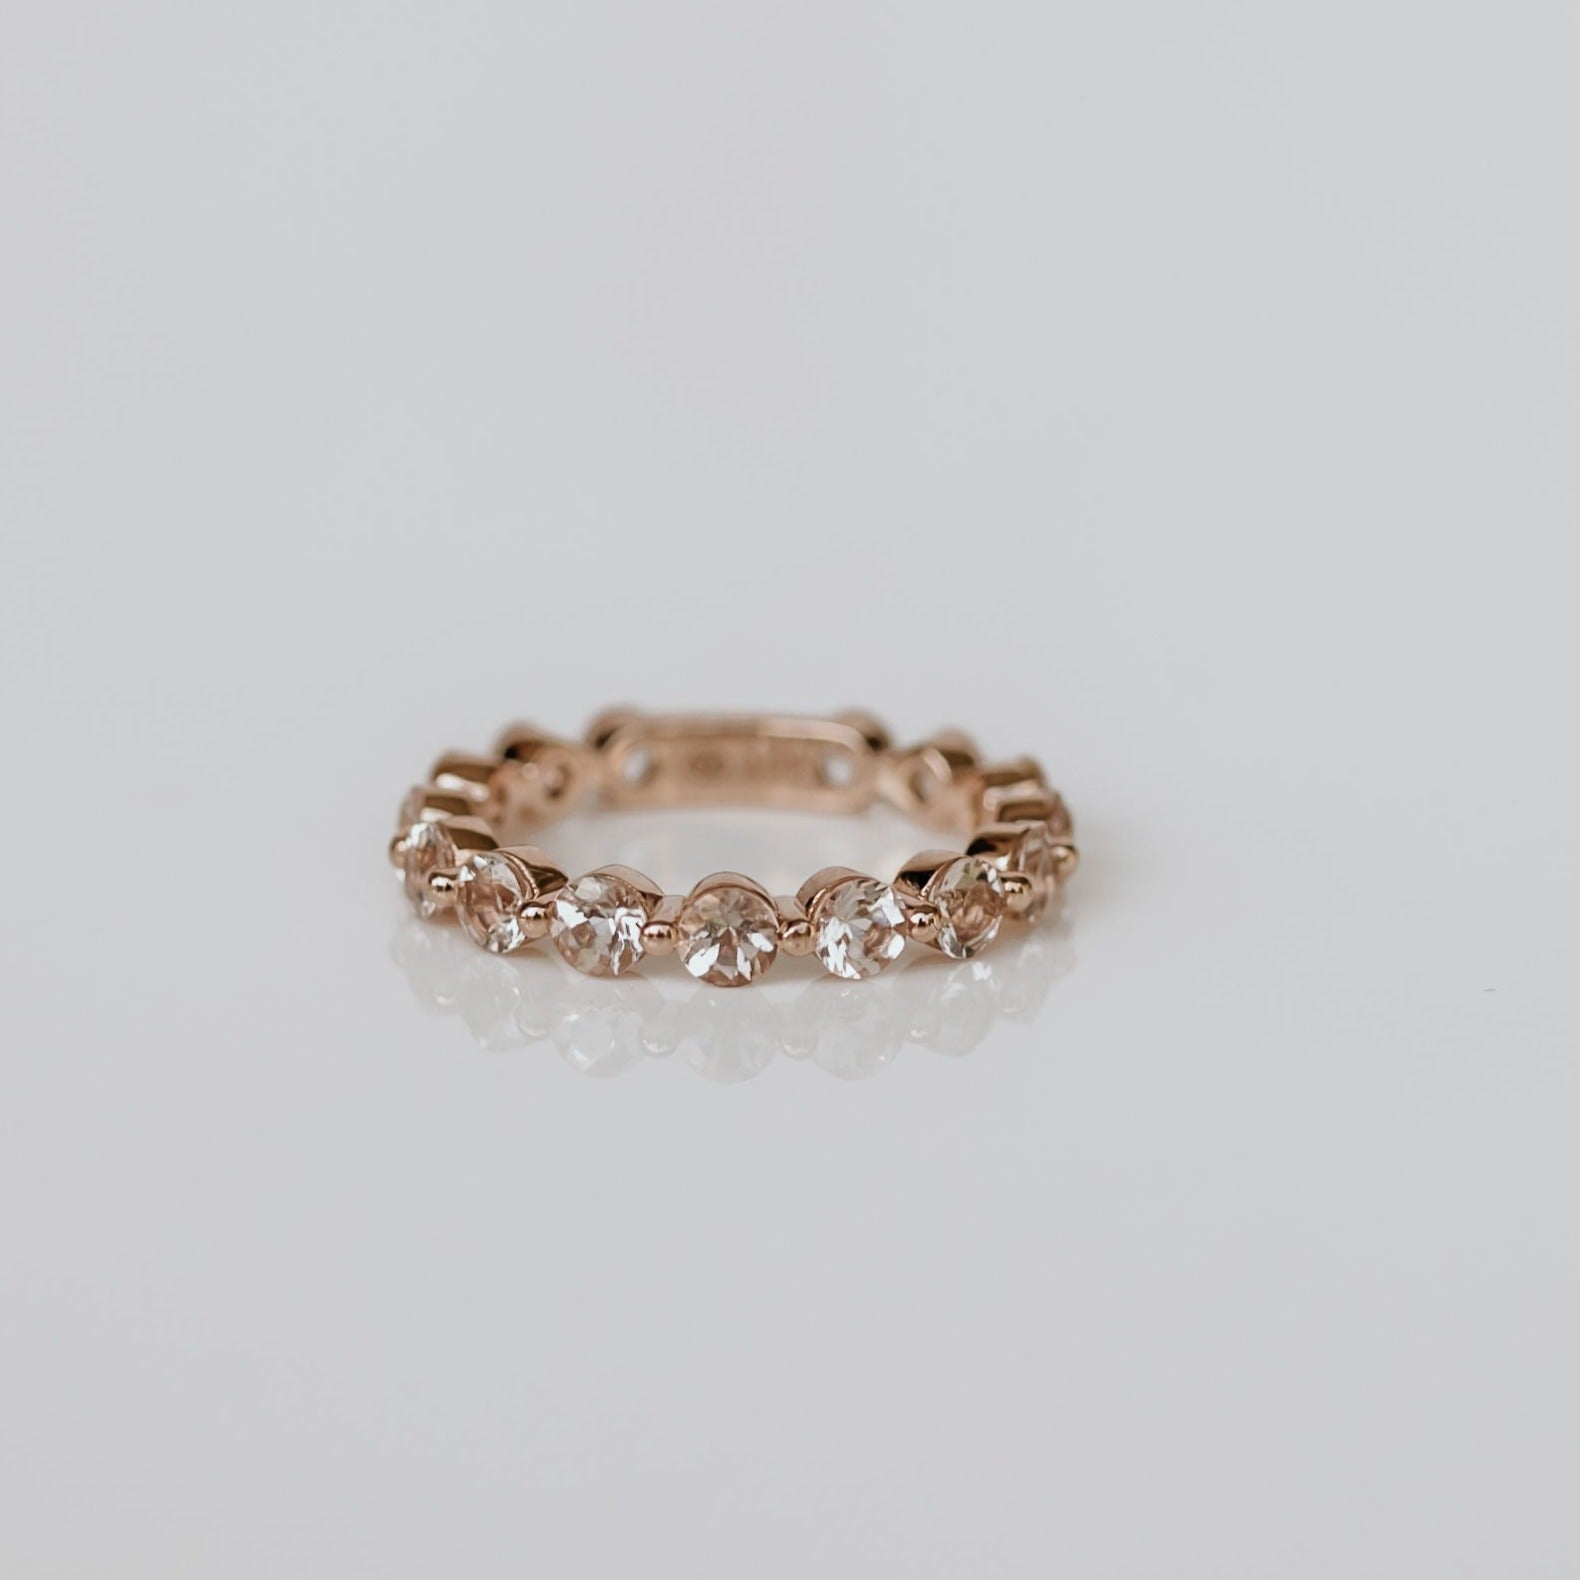 18ct rose gold bobble eternity ring with 15 3mm morganite stones.